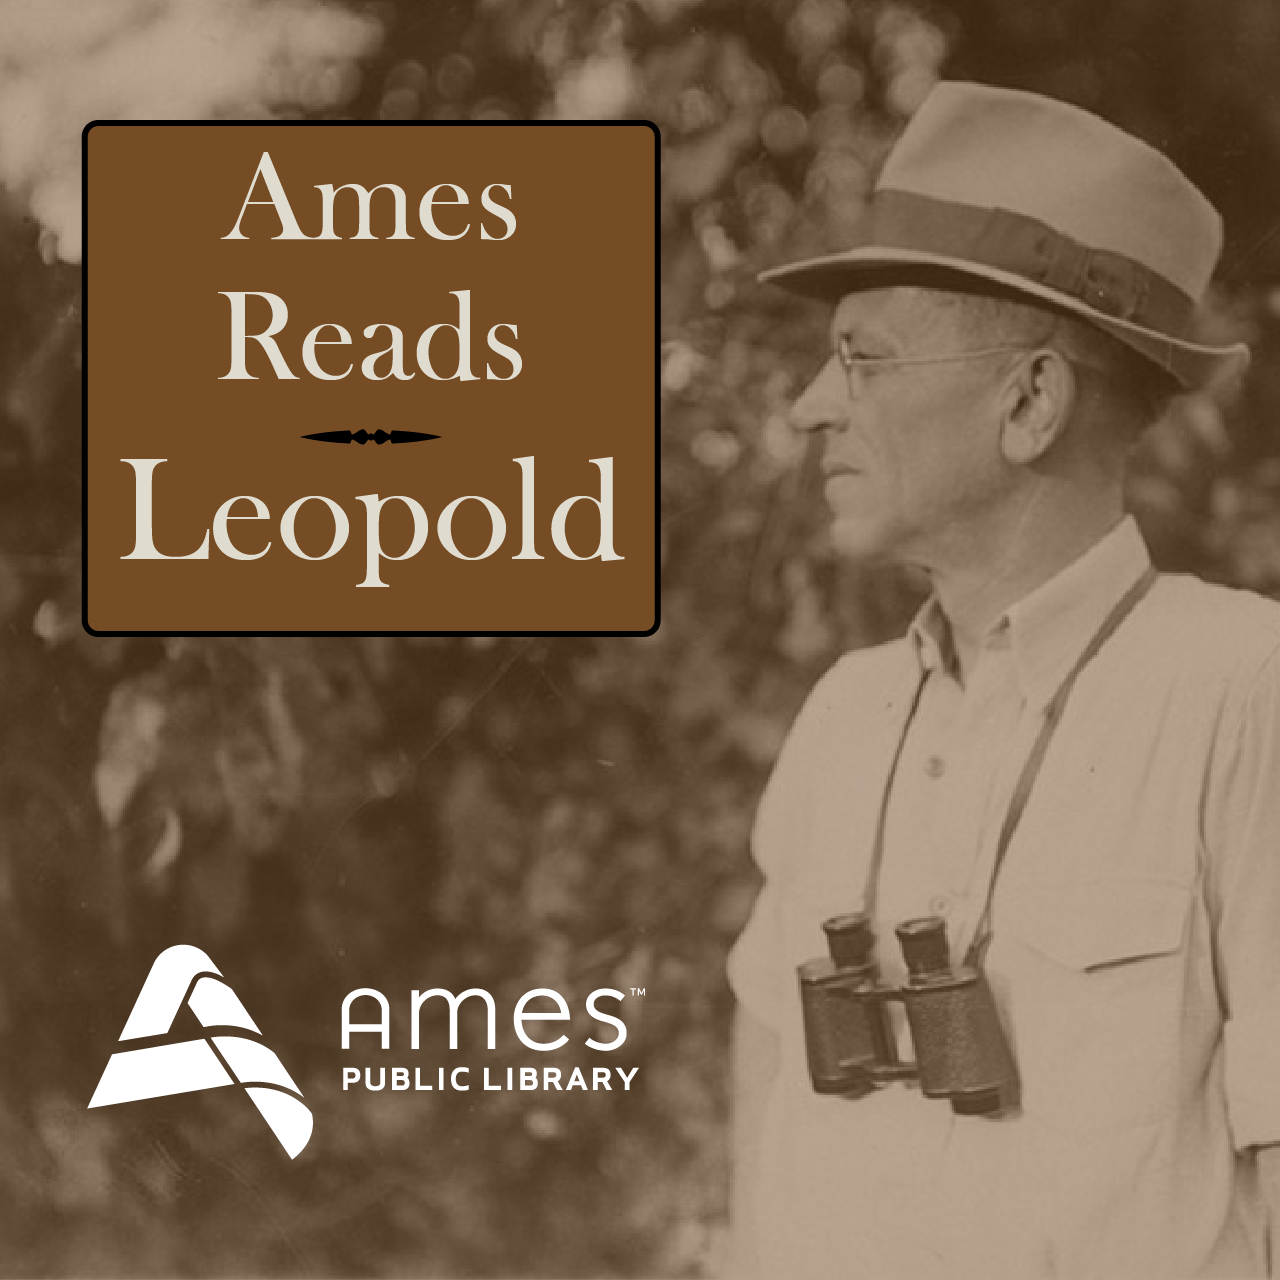 Ames Reads Leopold